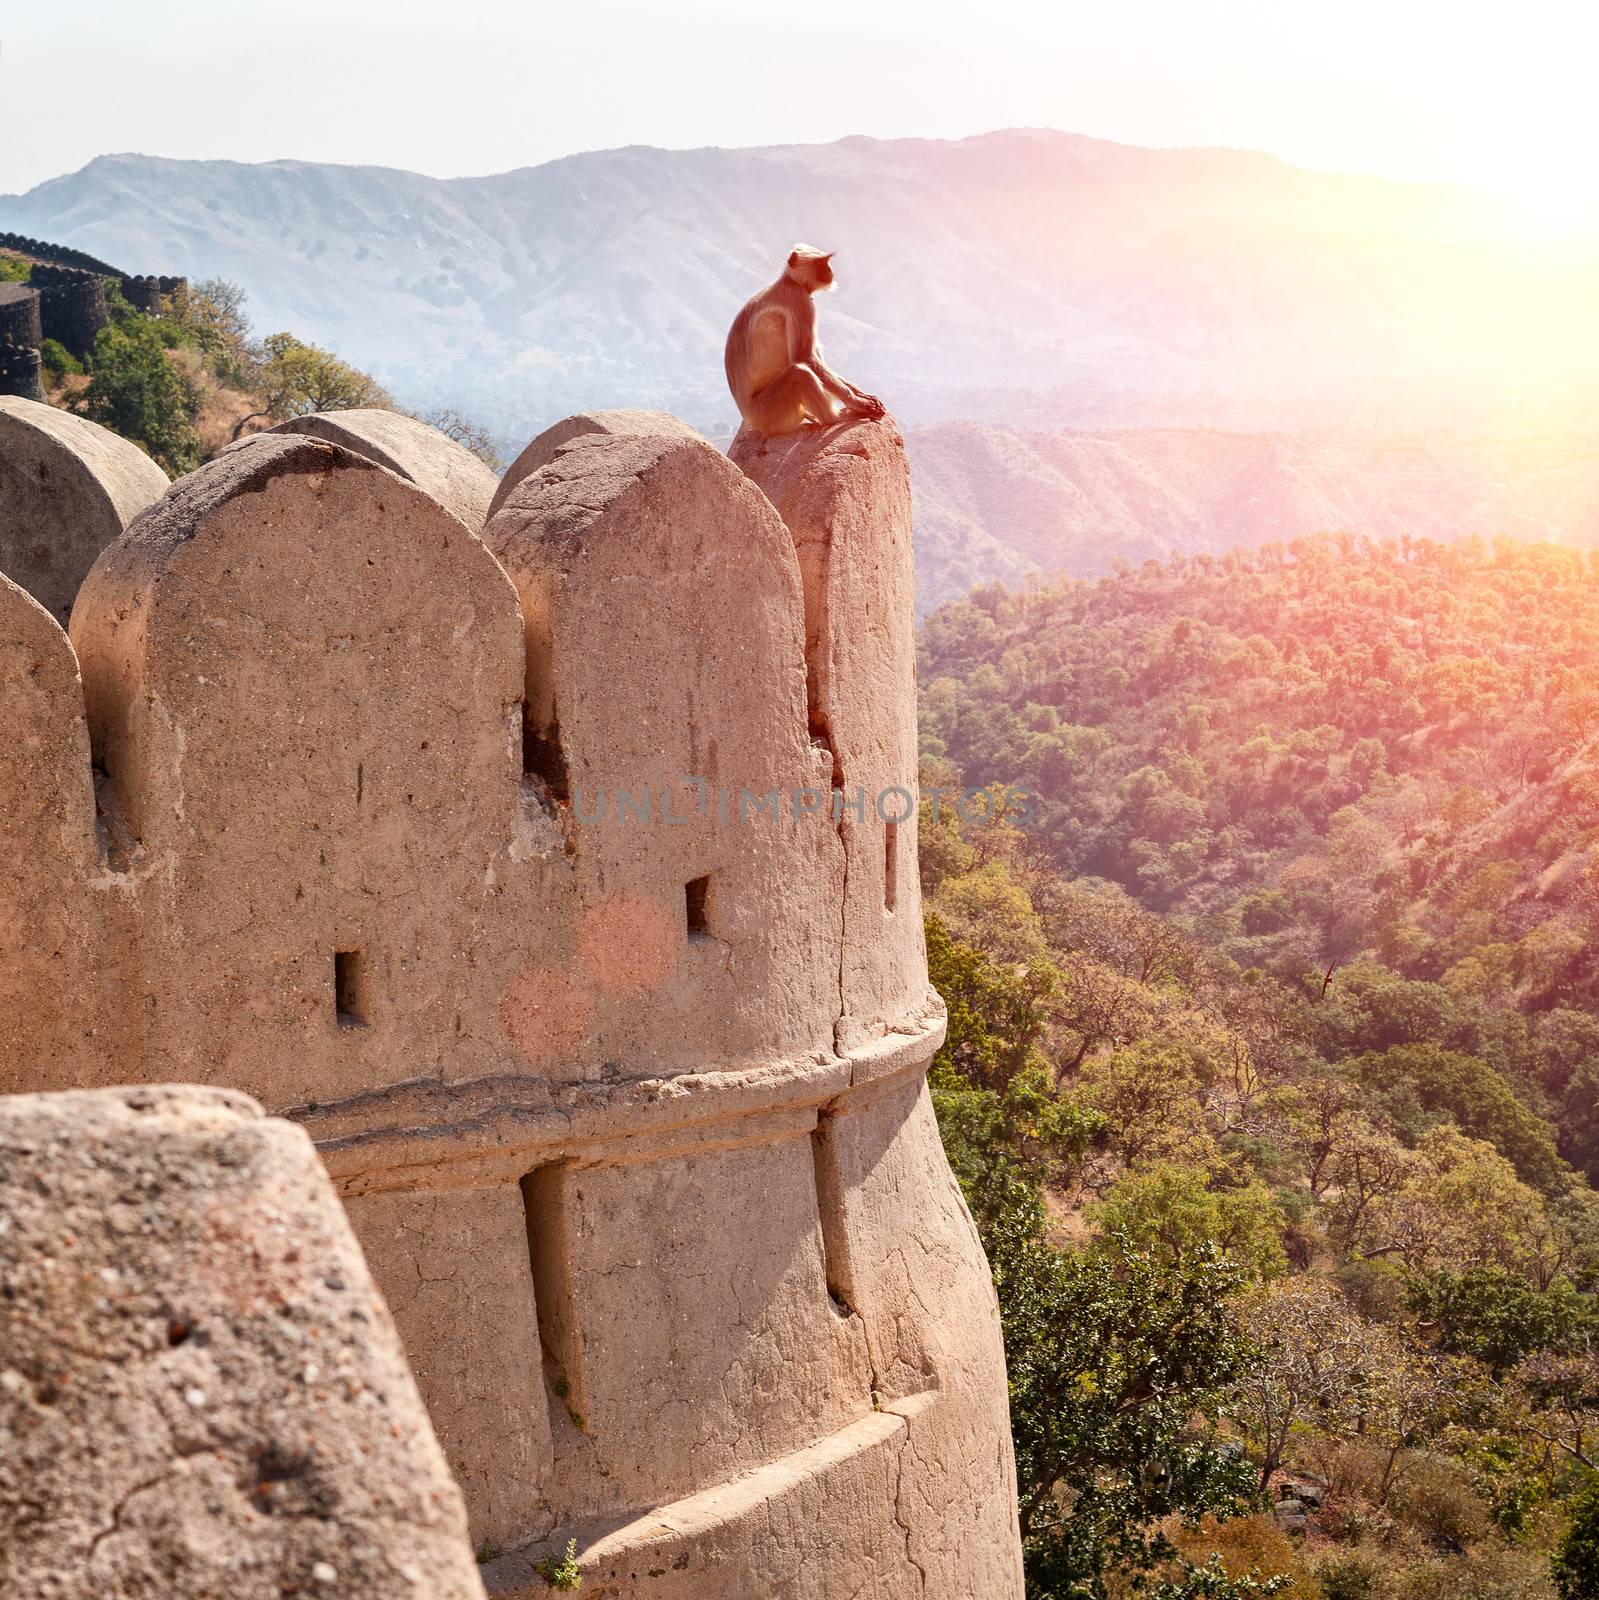 Kumbhalgarh fort, Rajasthan, India.  Kumbhalgarh is a Mewar fortress in the Rajsamand District of Rajasthan state in western India and is known world wide for its great history.